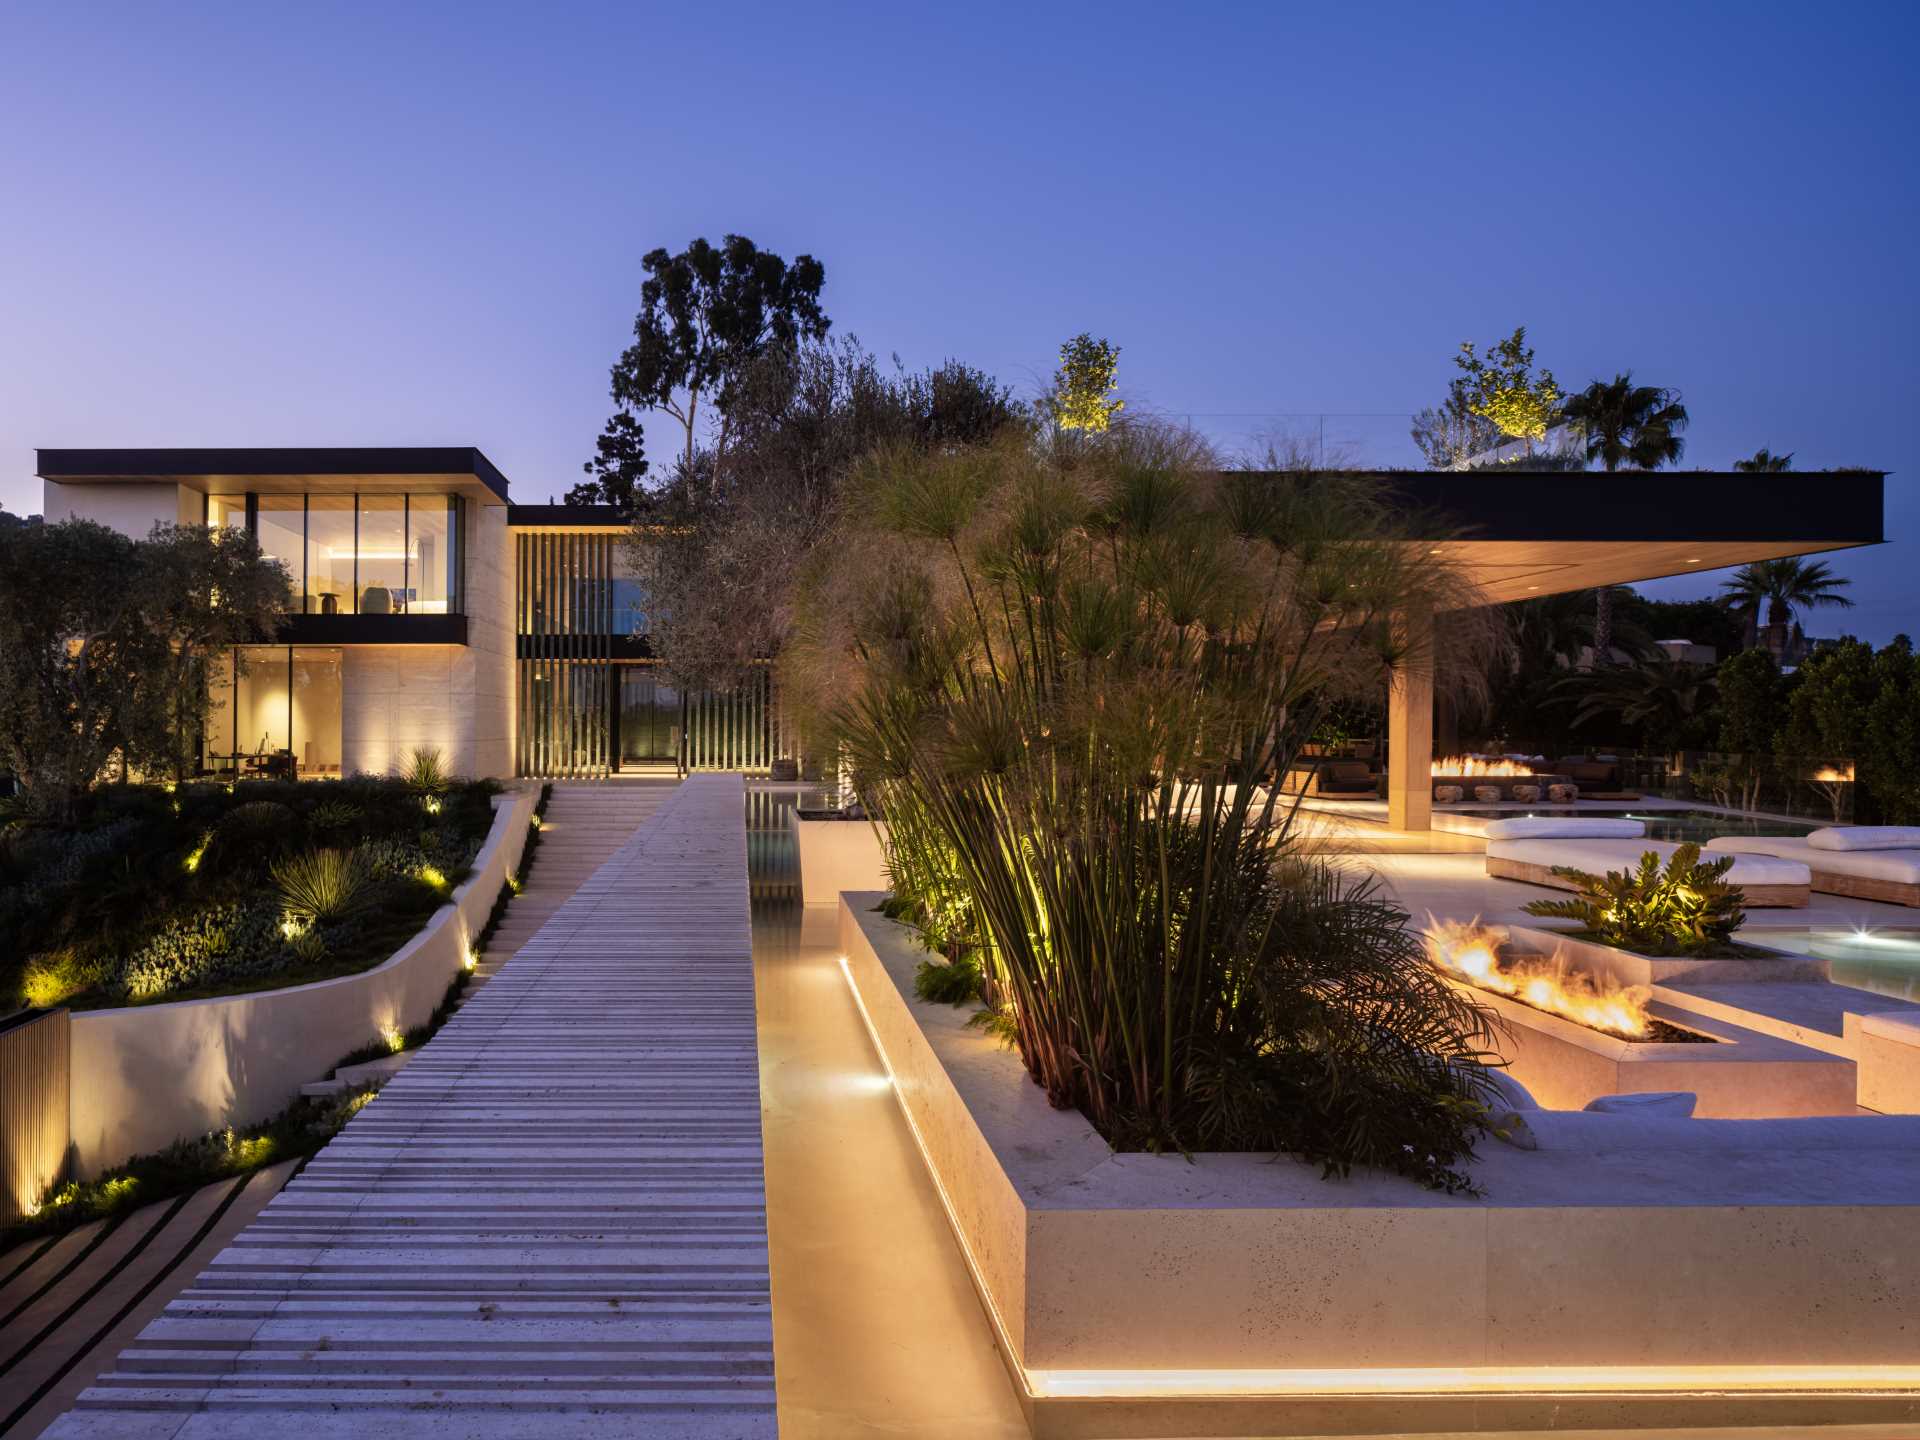 Outdoor lighting highlights the design features and landscaping of this house.